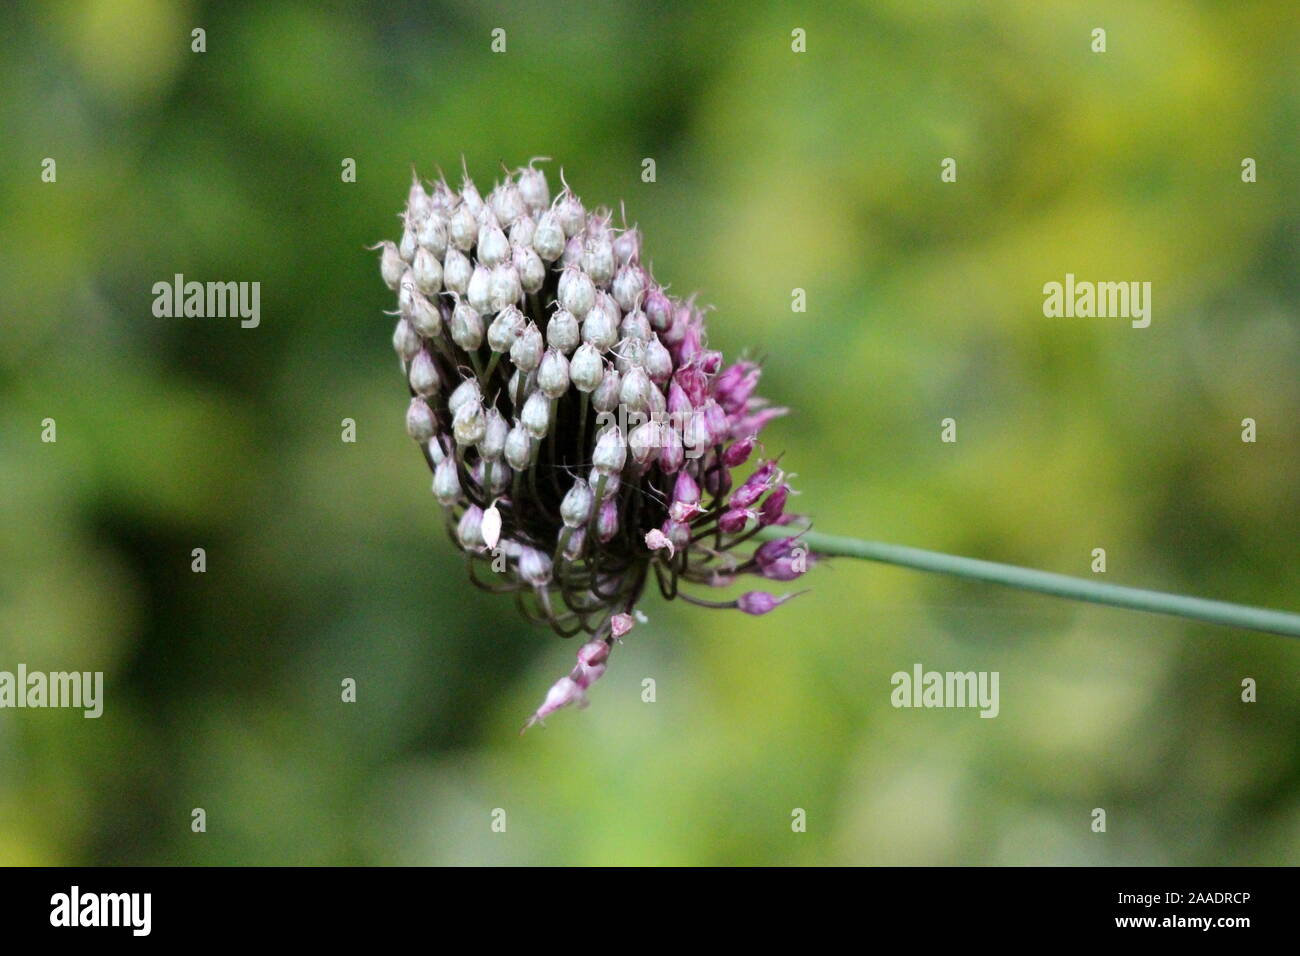 Small Allium or Ornamental onion round flower head composed of dozens of closed star shaped white and light purple flowers growing in local Stock Photo